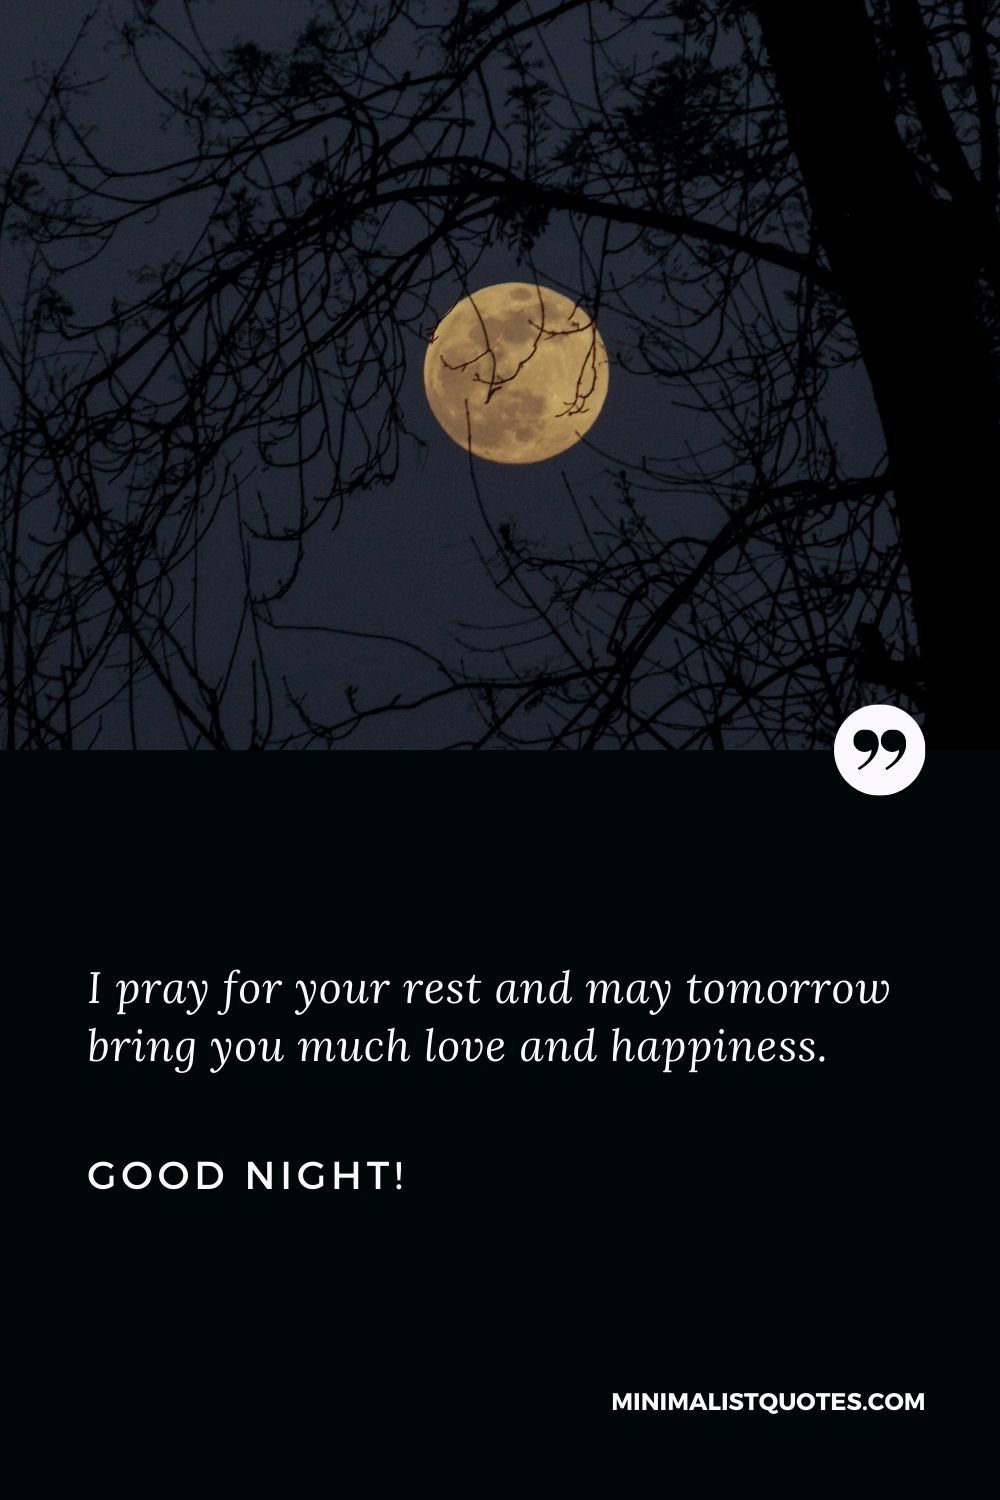 Good night sister: I pray for your rest and may tomorrow bring you much love and happiness. Good Night!